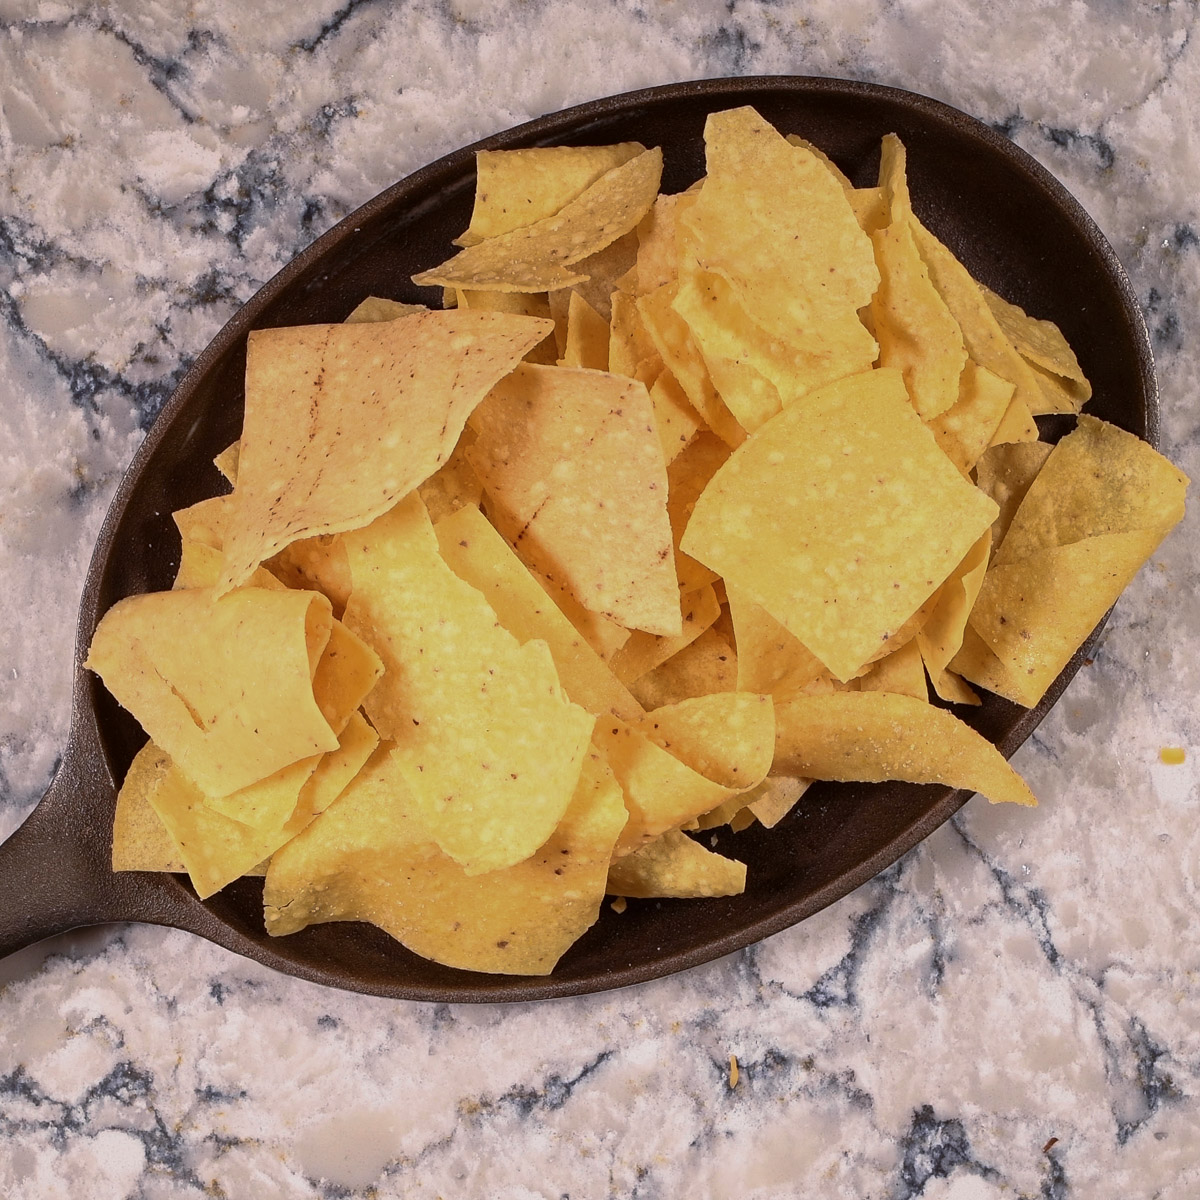 Spread a layer of tortilla chips on an oven safe pan.